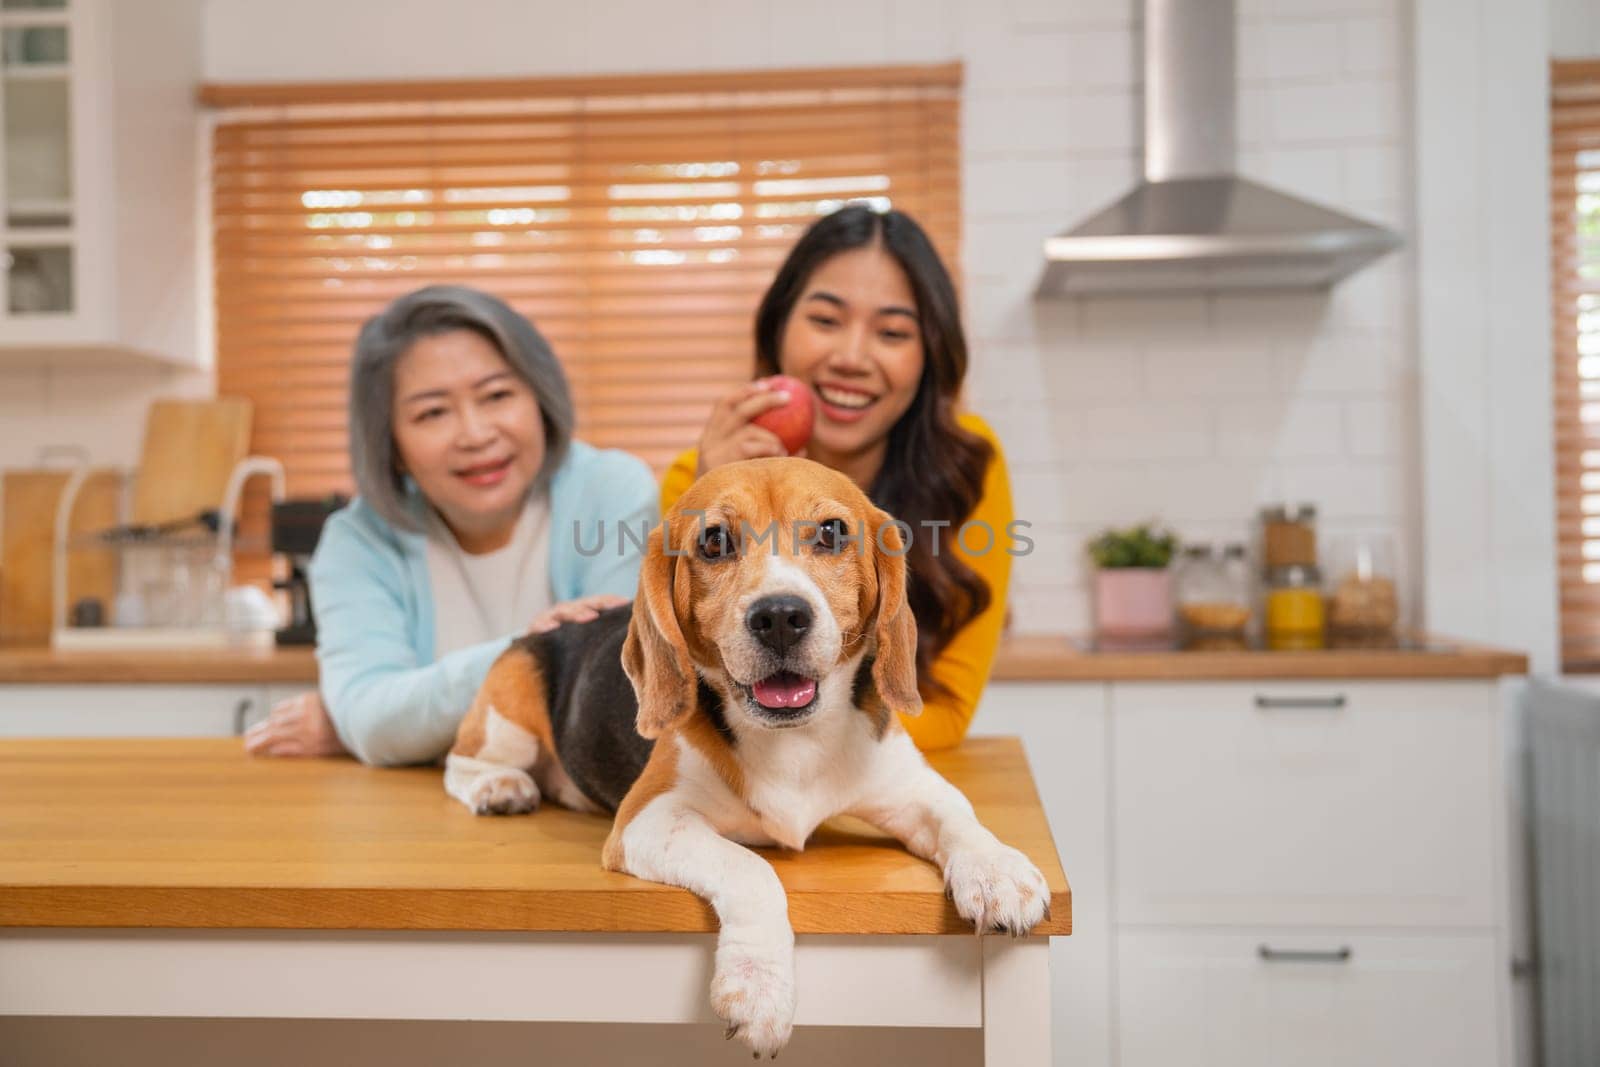 Main focus of beagle dog stay on table of kitchen in front of Asian senior woman and young girl and they look happy in the house with day light. by nrradmin